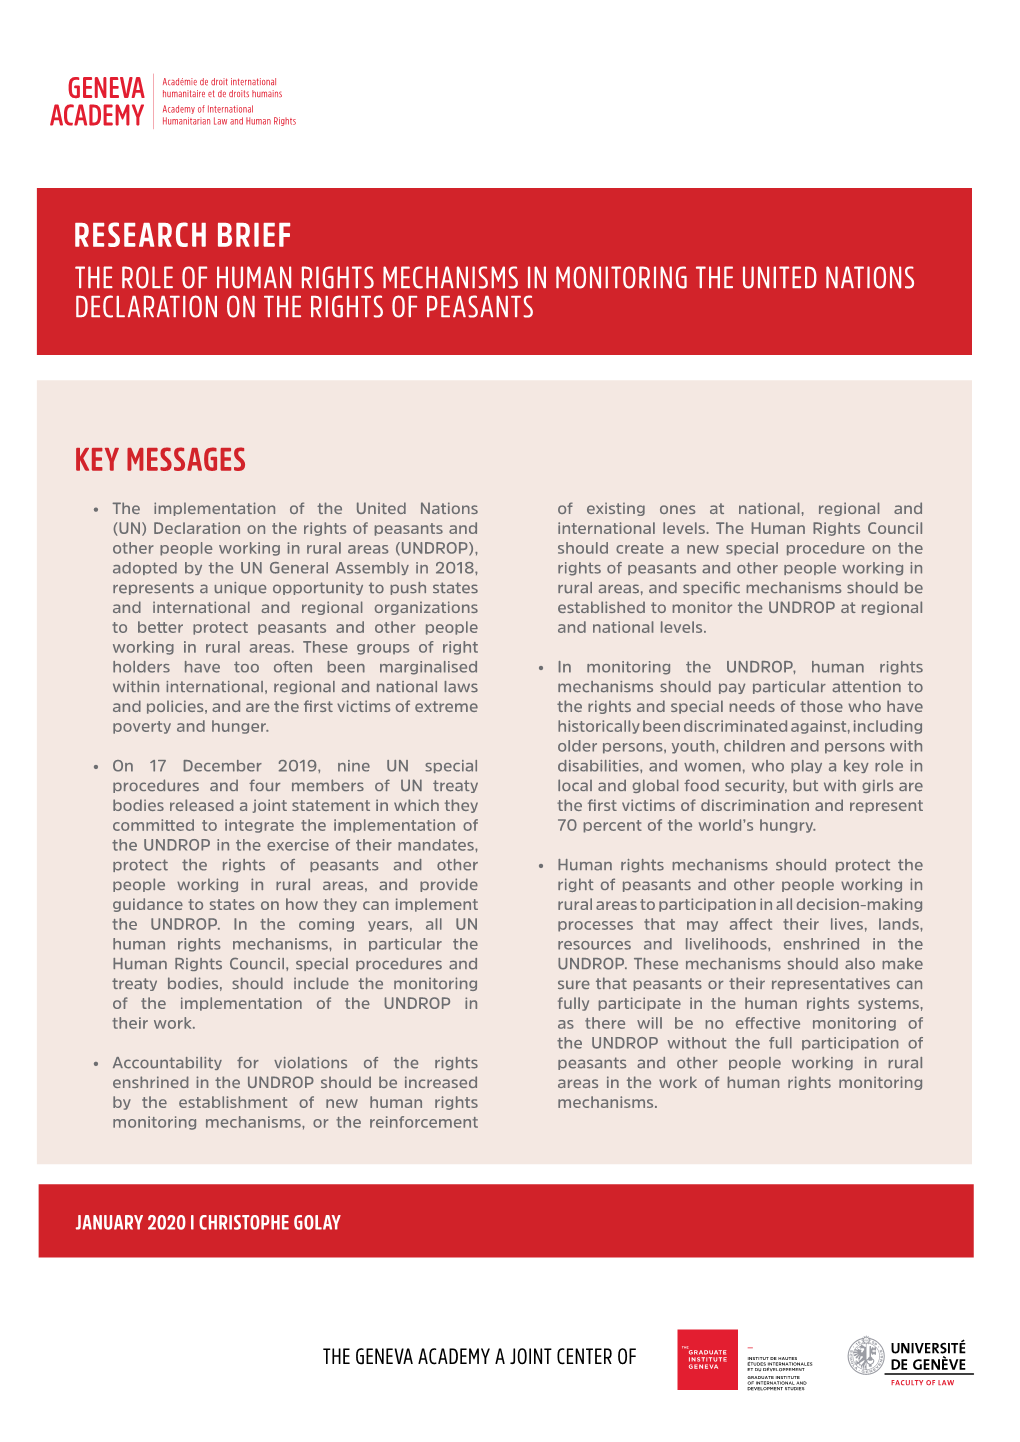 Research Brief the Role of Human Rights Mechanisms in Monitoring the United Nations Declaration on the Rights of Peasants